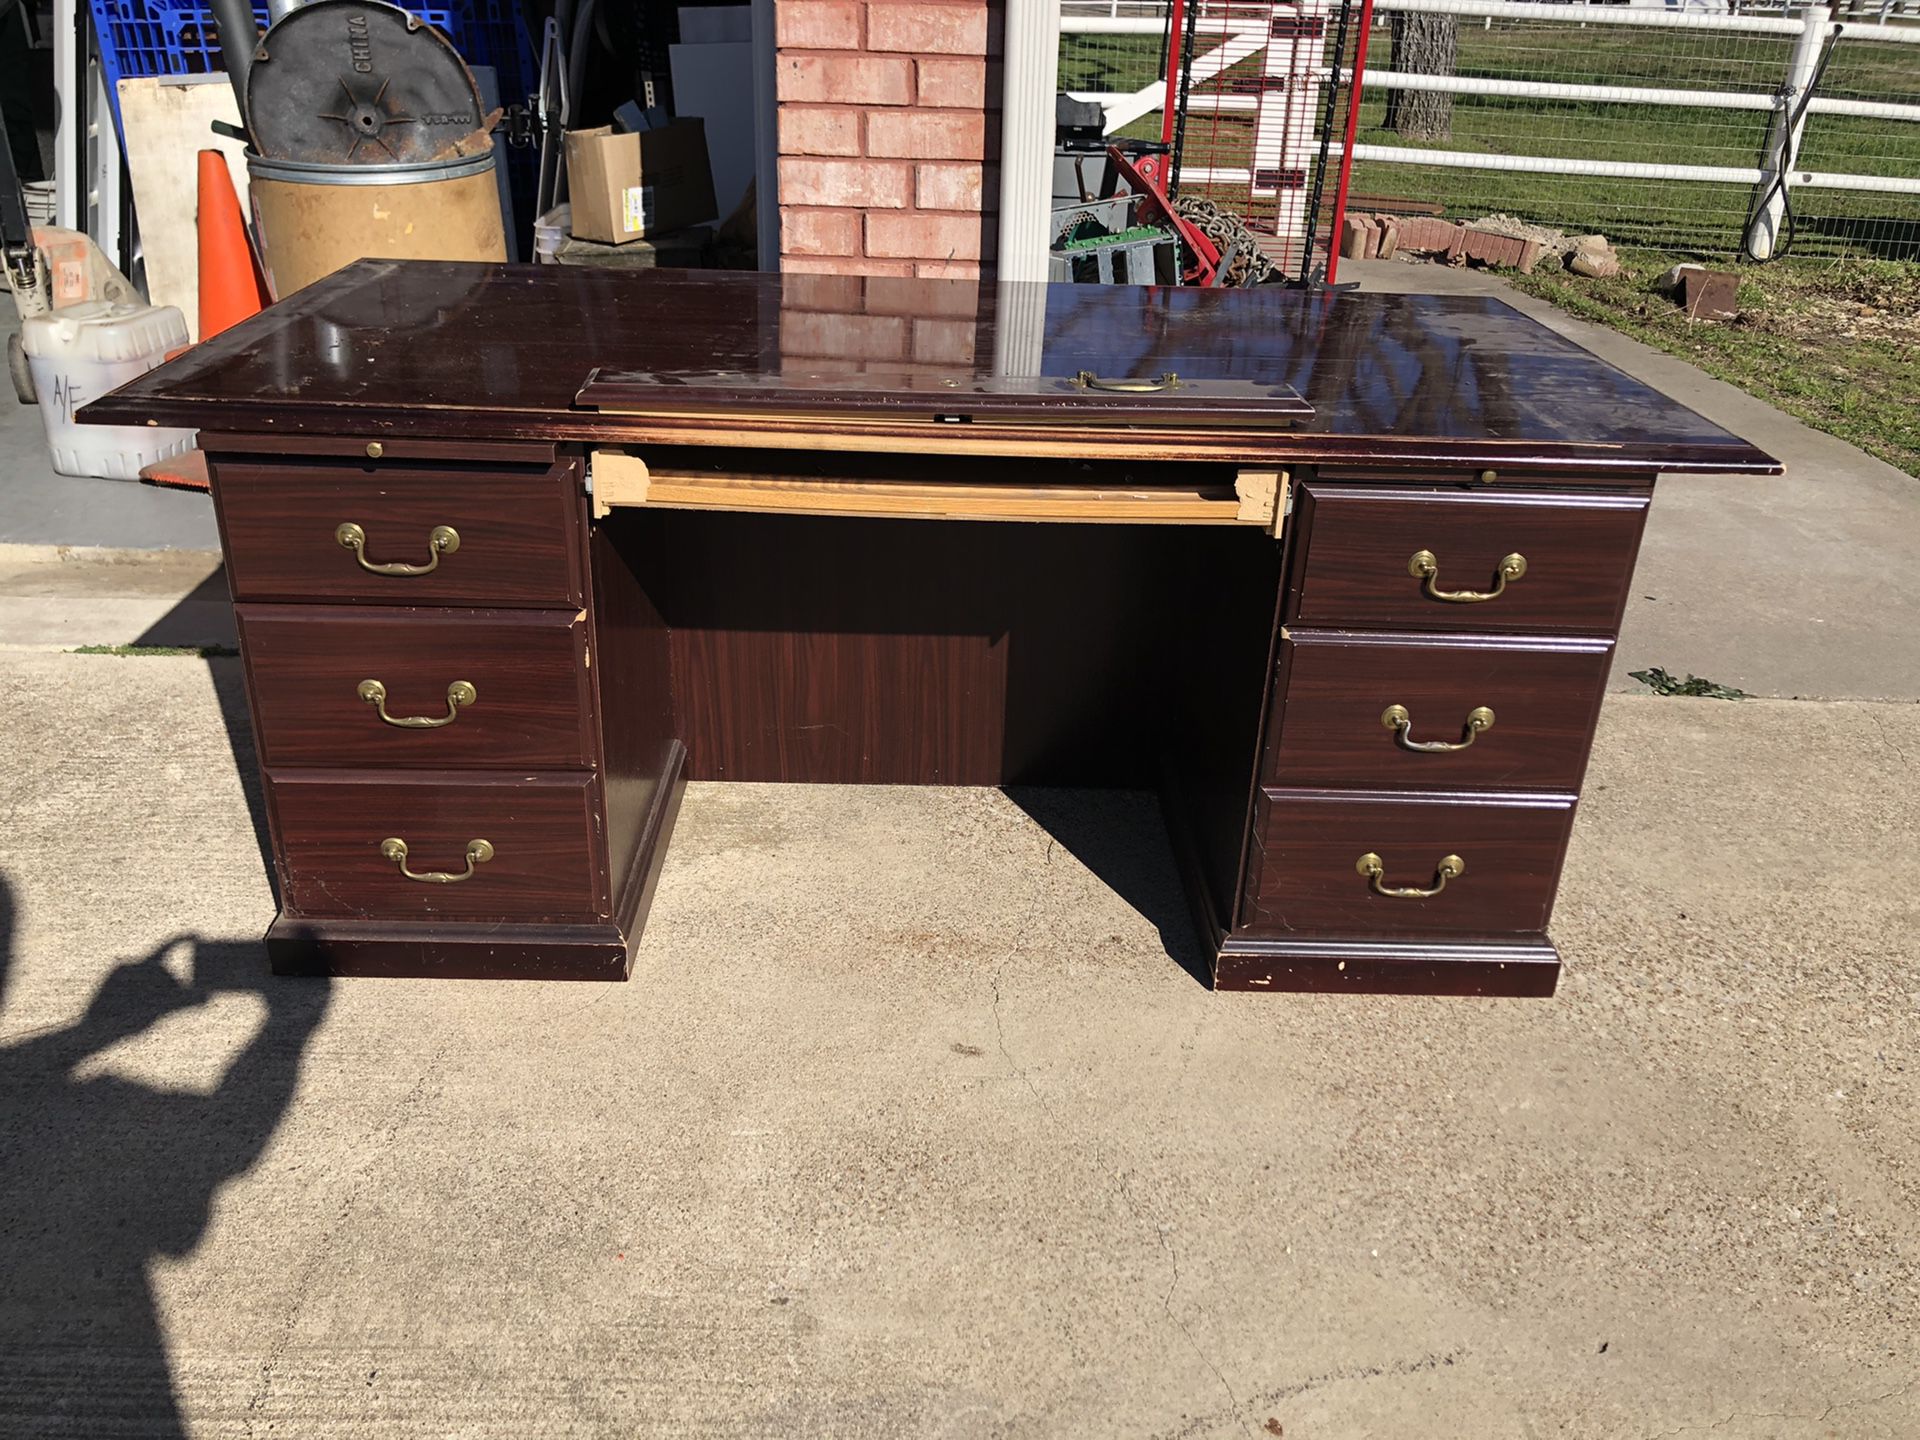 FREE Large office desk very sturdy & heavy. Has a lot of scratches and the center drawer needs to be screwed back in place. Great project piece.